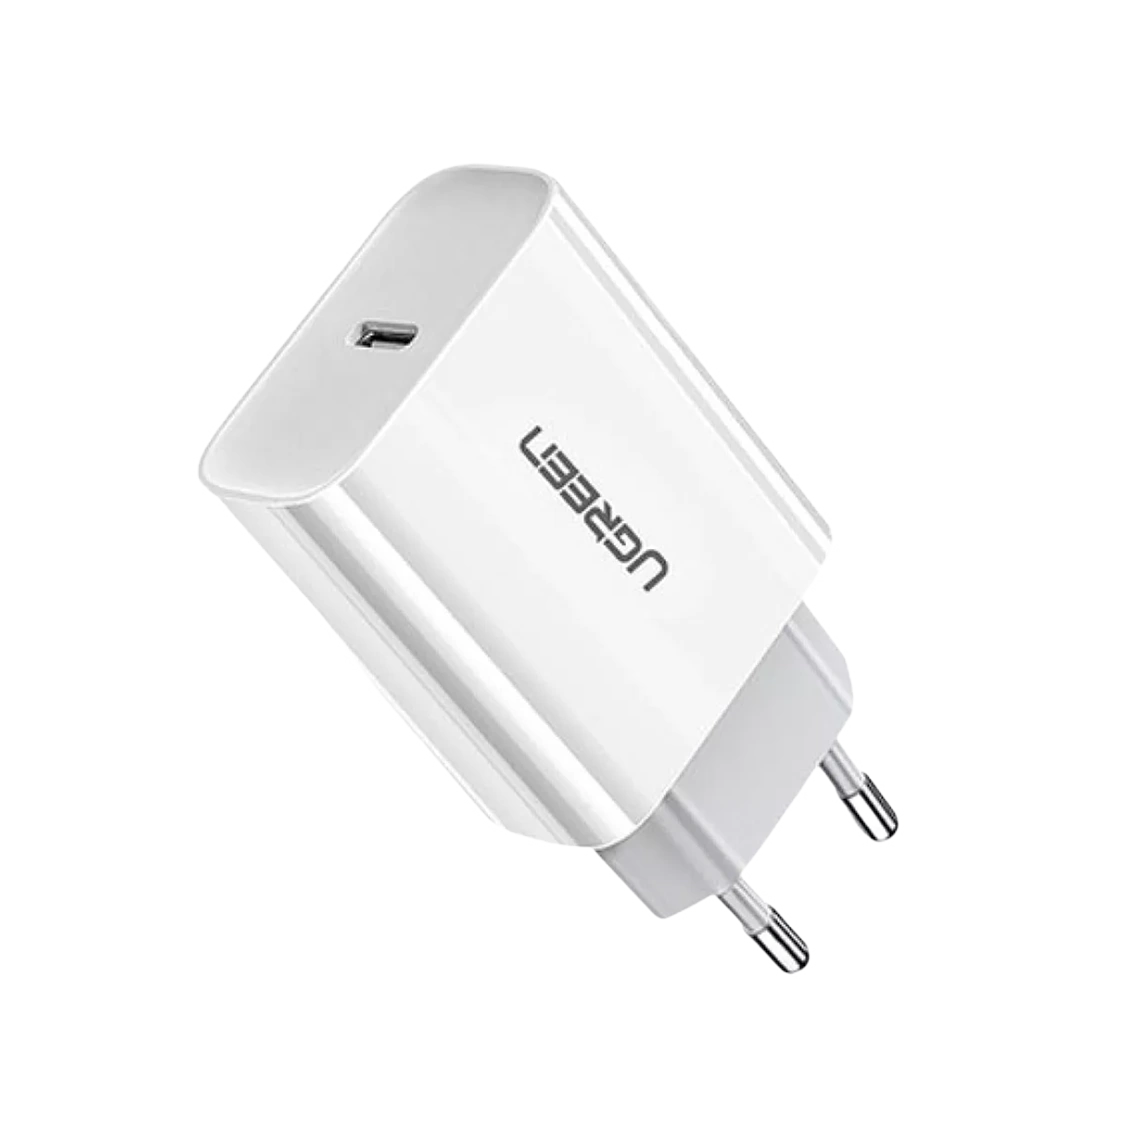 UGREEN 20w PD 3.0 Fast USB-C Quick Charger CD137